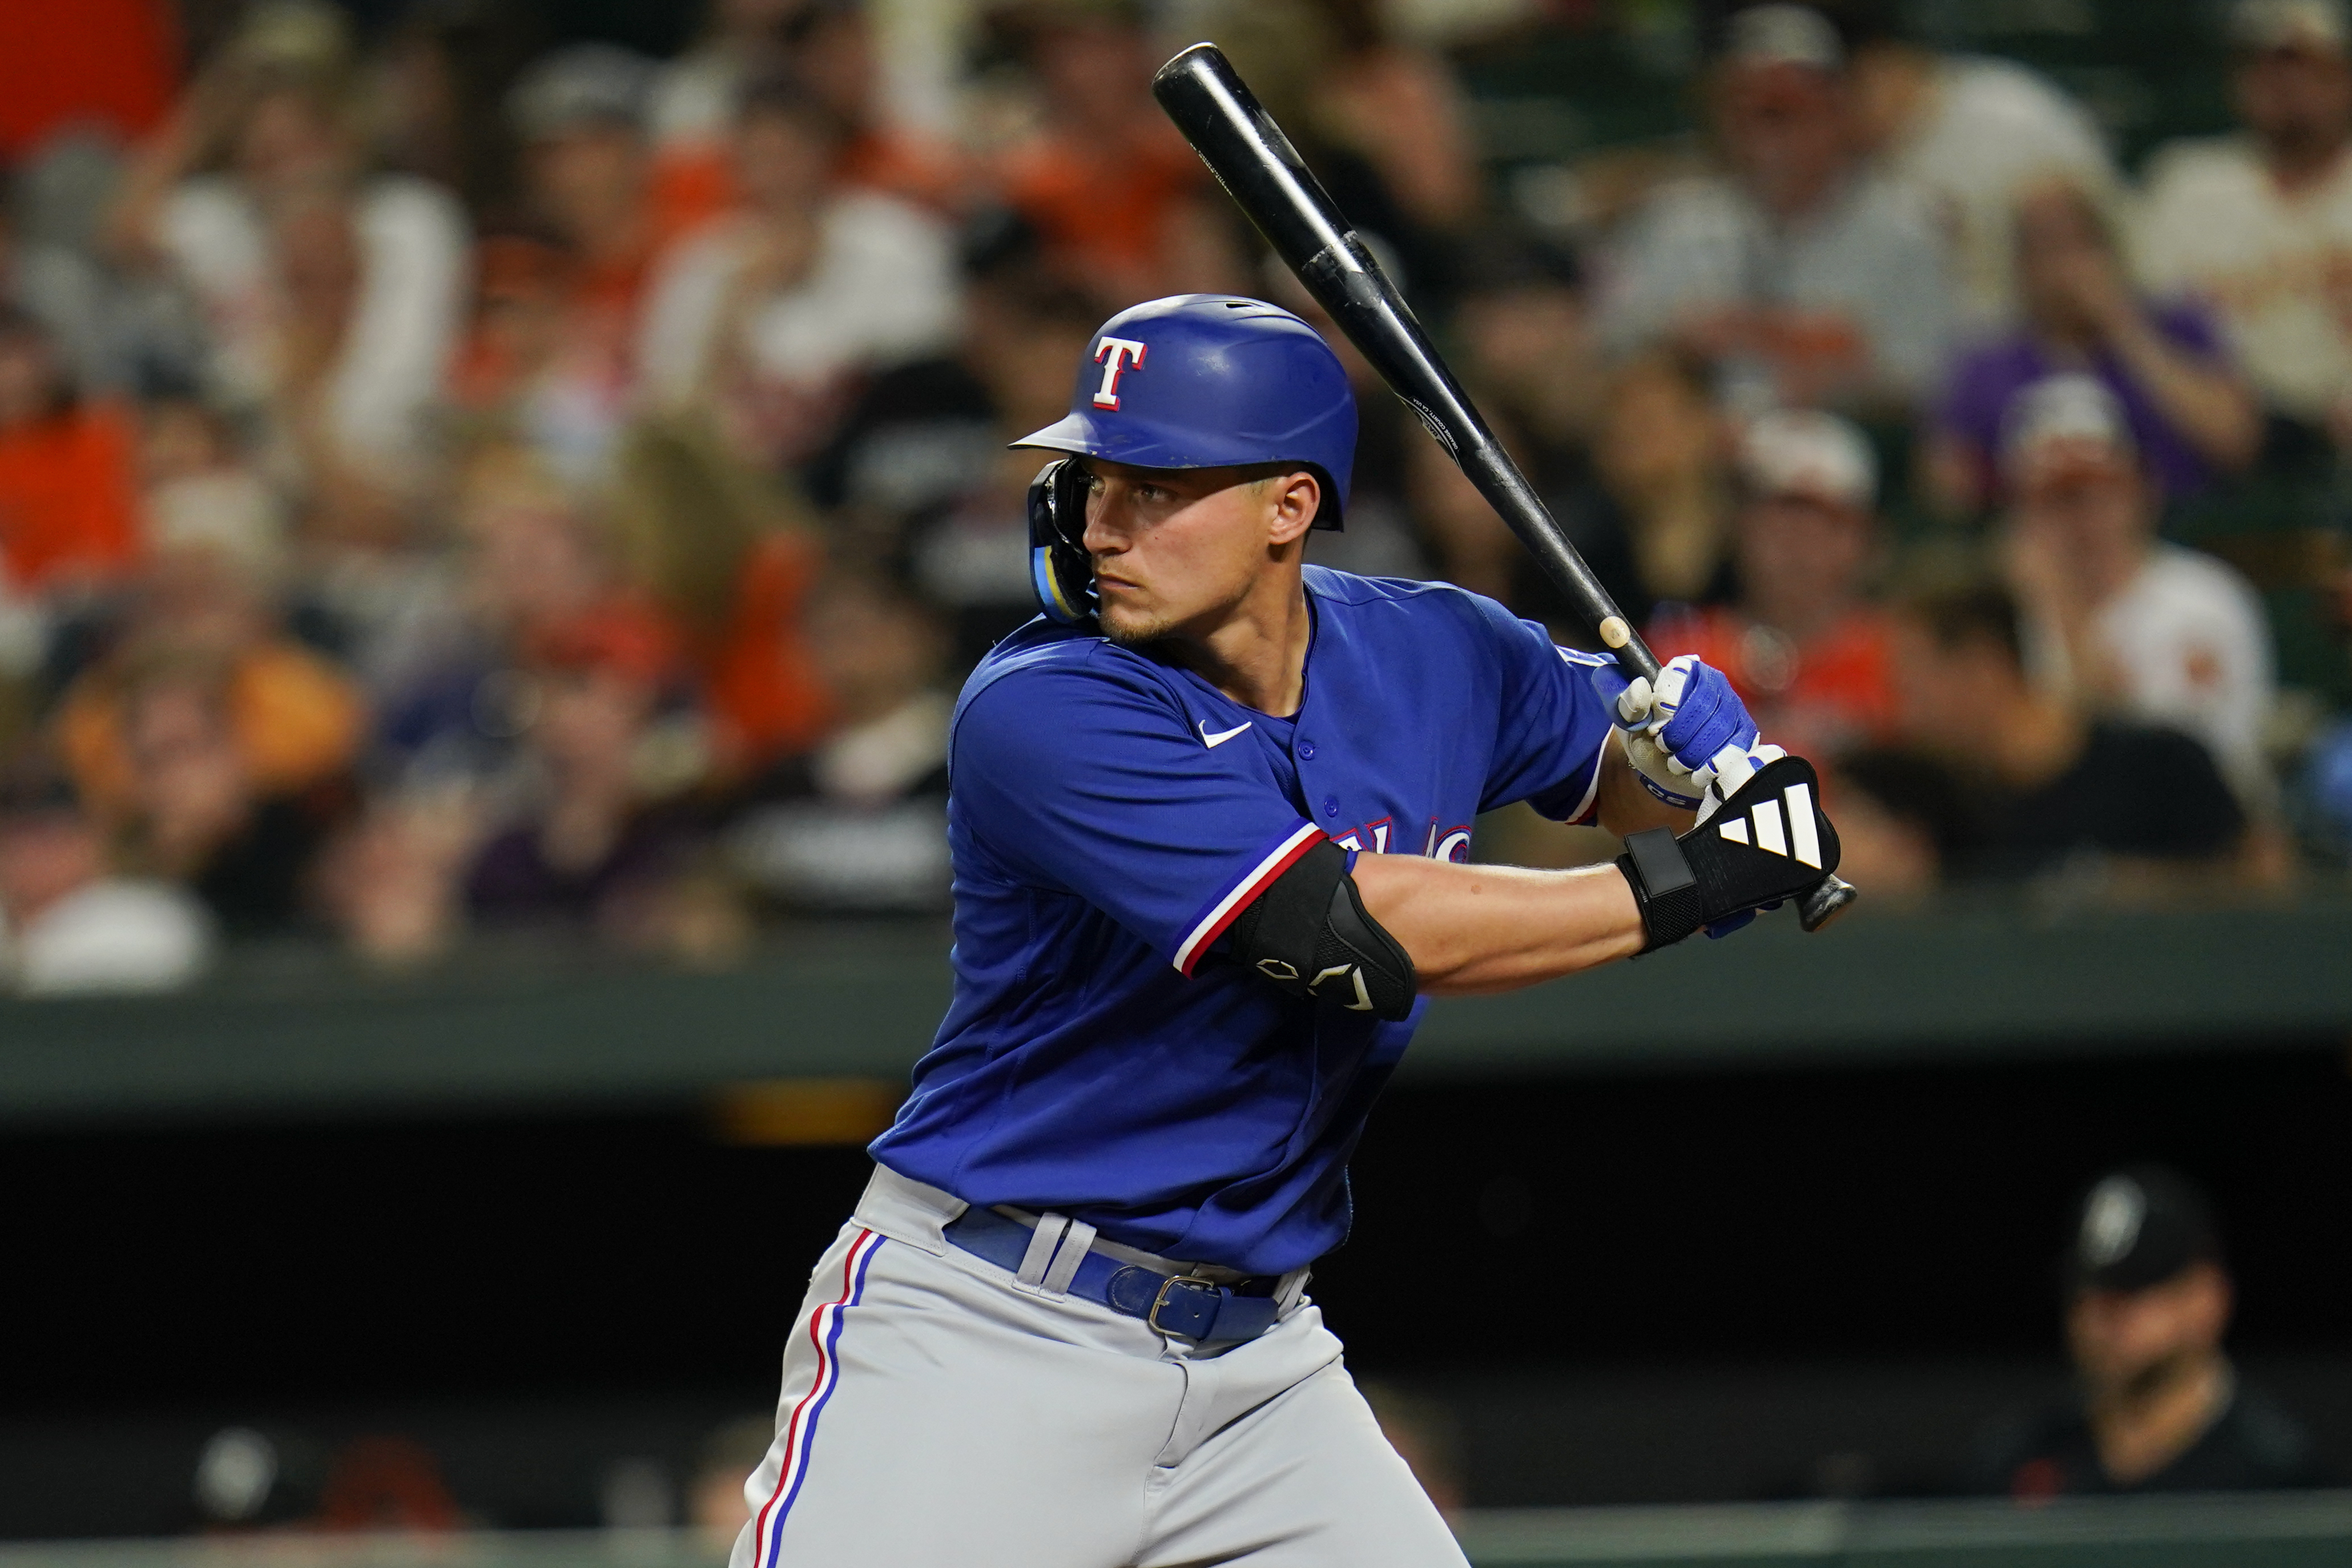 Texas Rangers' Corey Seager waits for a pitch during a game against the Baltimore Orioles on Friday, May 26, 2023. (AP Photo/Julio Cortez)